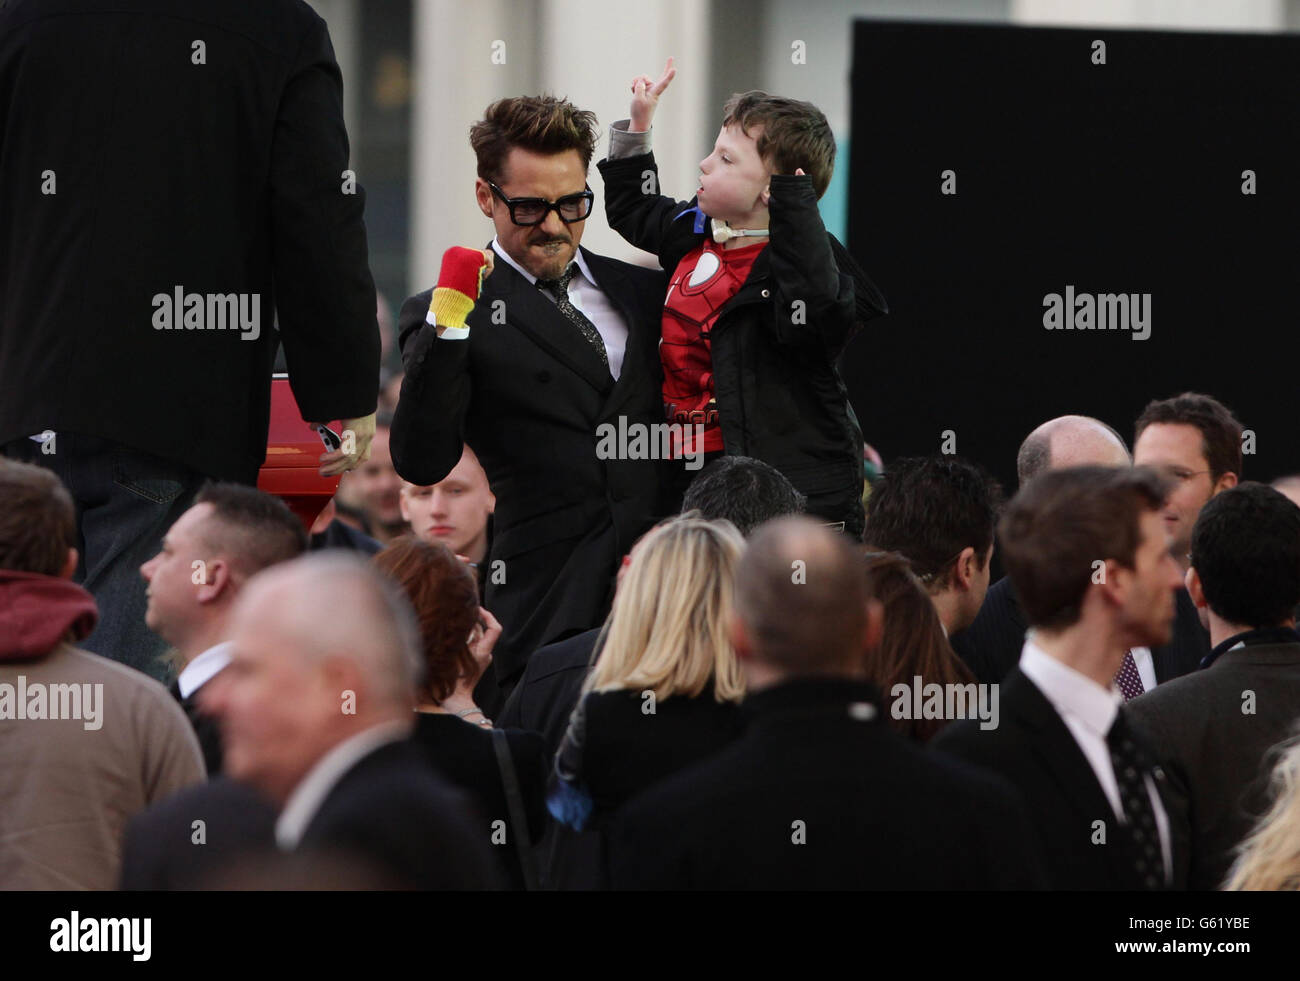 Iron Man 3 Premiere - London. Robert Downey Jr with a young boy at the premiere of Iron Man 3 at the Odeon Leicester Square, London. Stock Photo